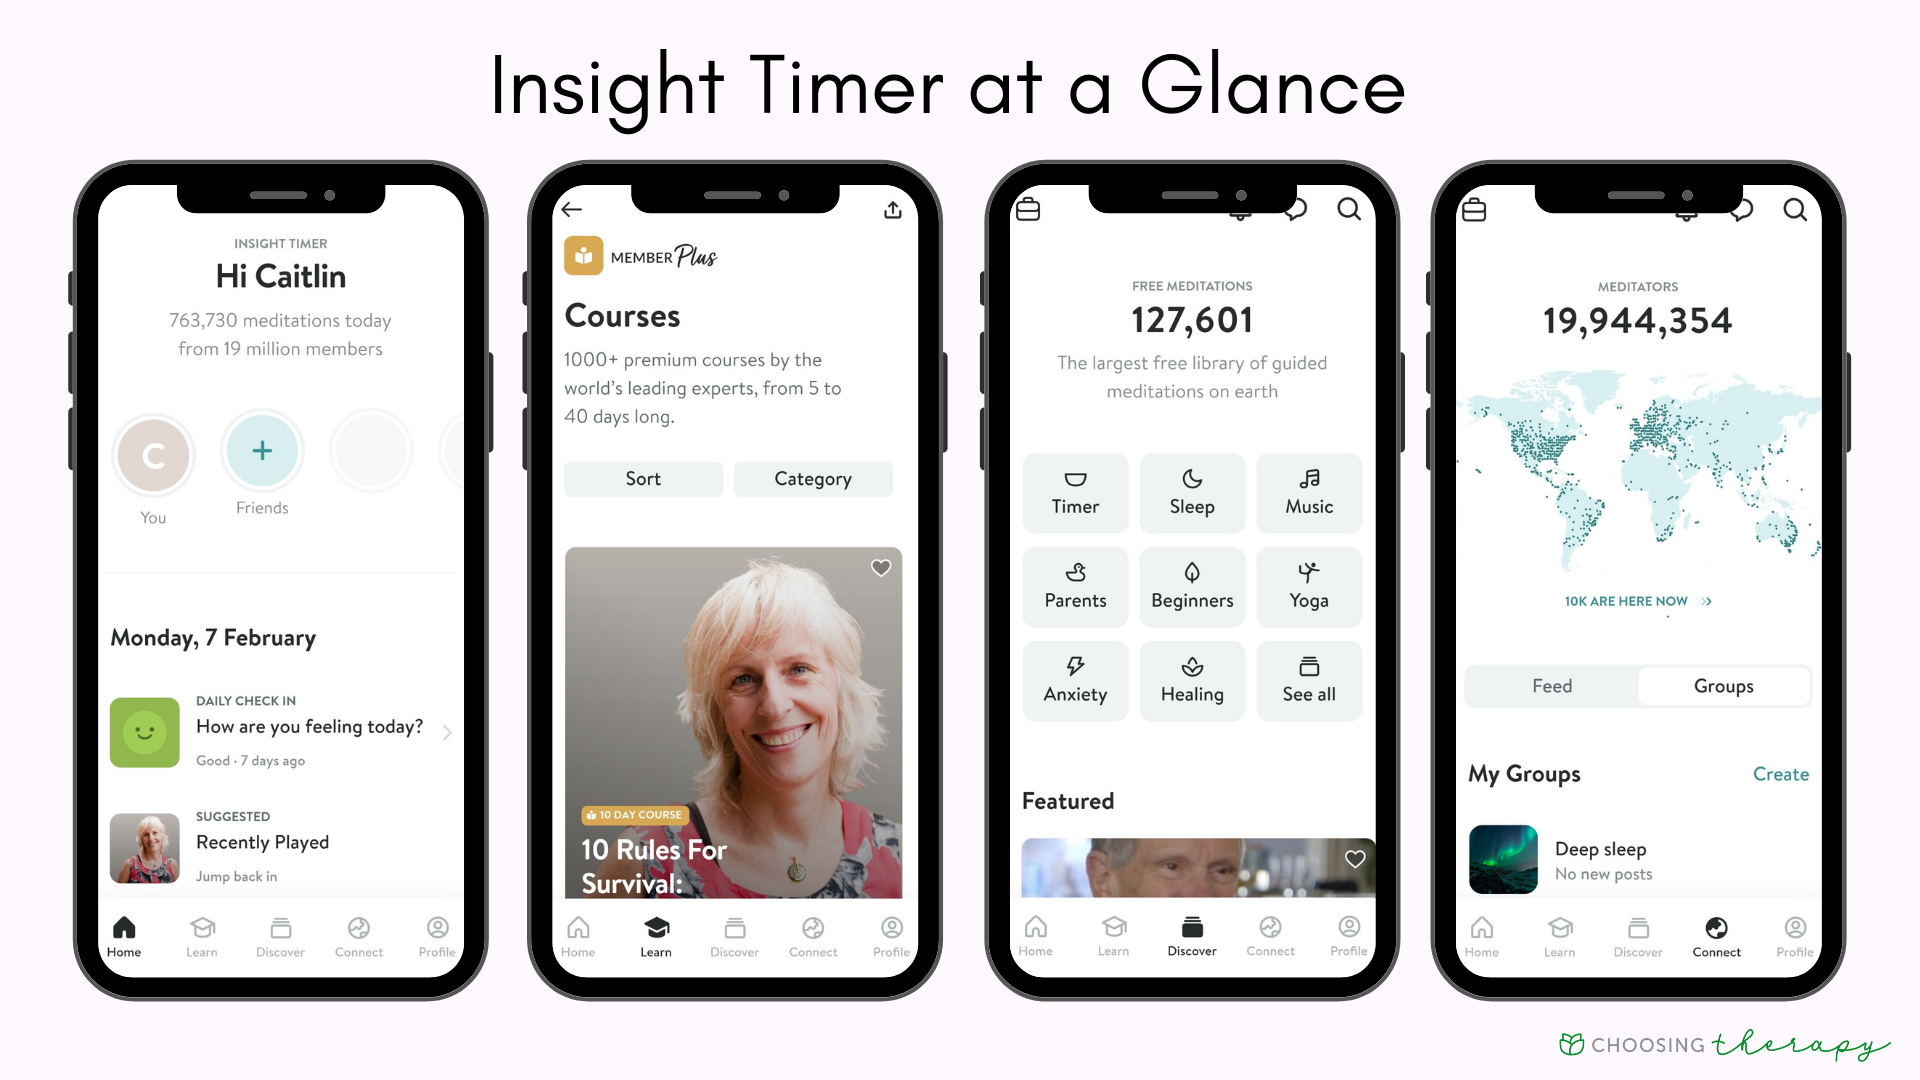 https://www.choosingtherapy.com/wp-content/uploads/2022/02/Insight-Timer-App-Review-2022-Image-of-Insight-Timer-at-a-Glance.png